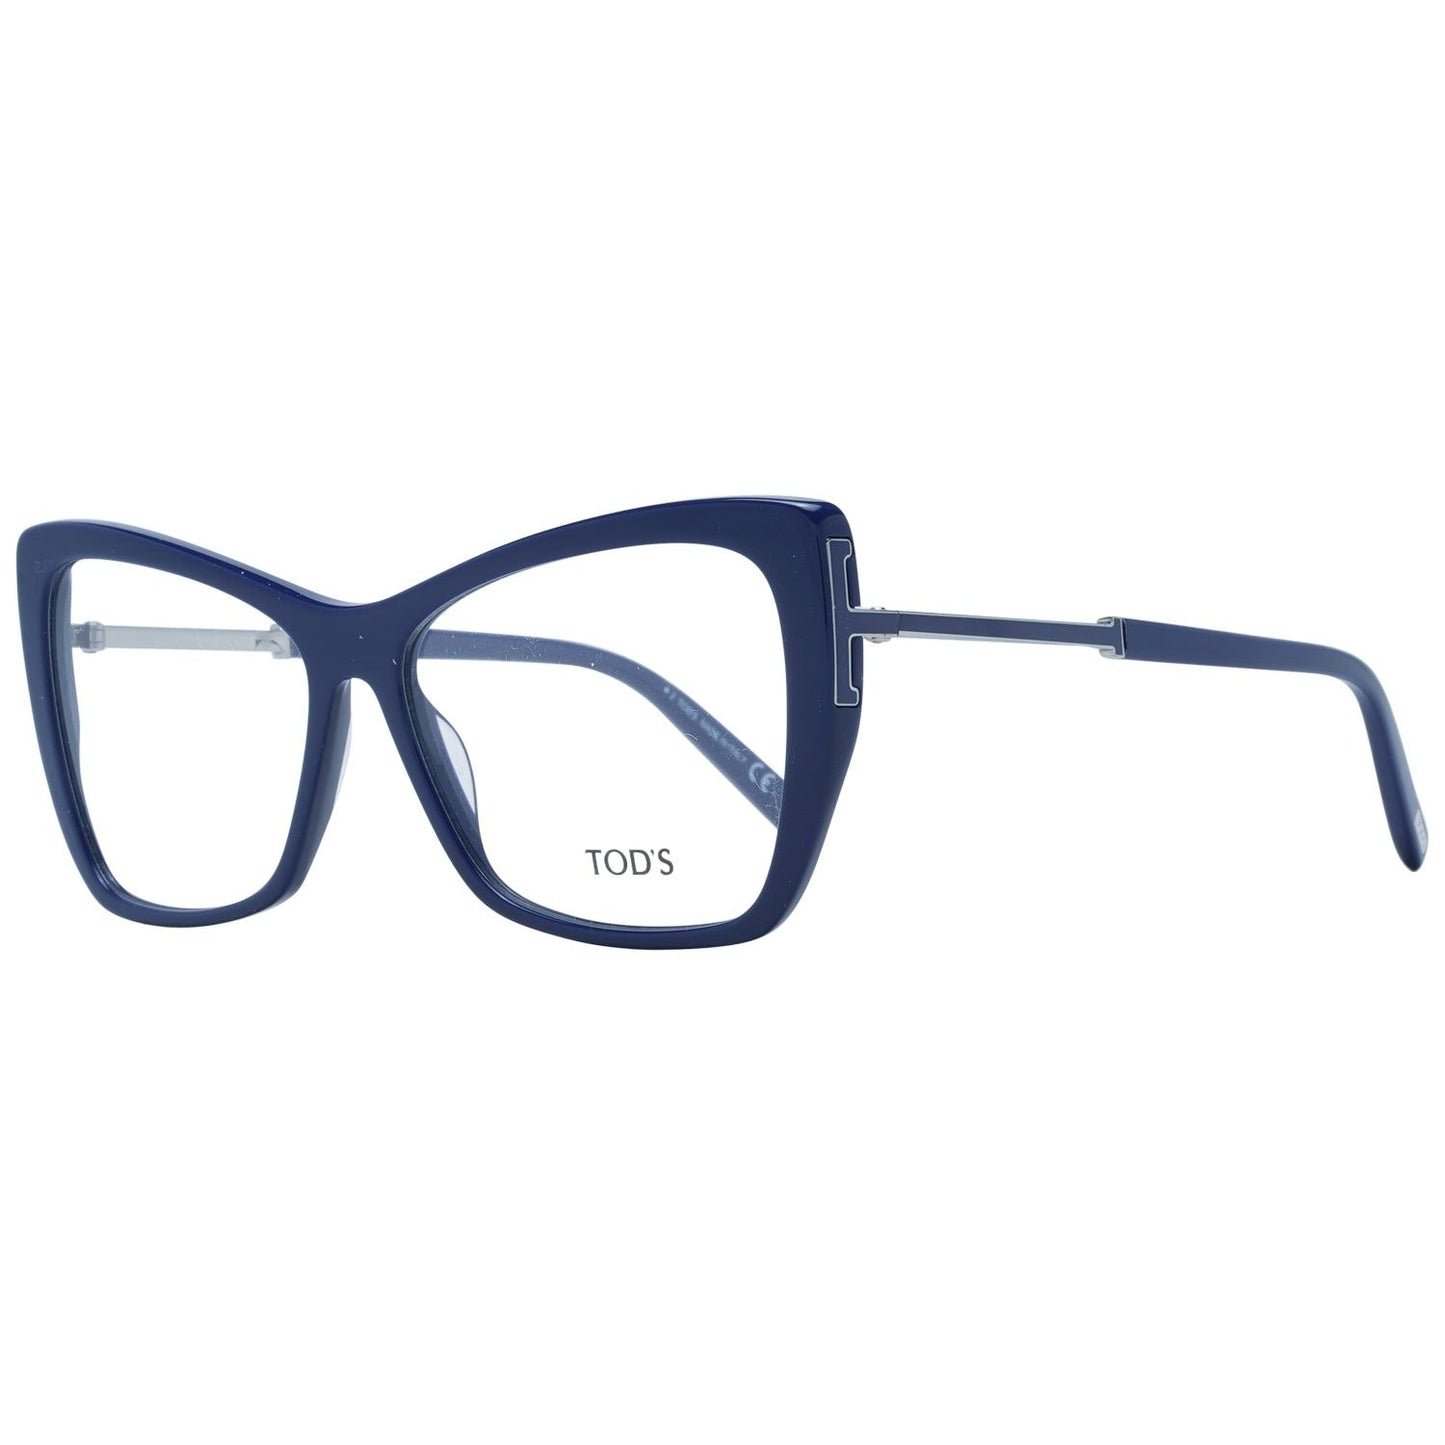 TODS FRAME TODS MOD. TO5273 54090 SUNGLASSES & EYEWEAR tods-mod-to5273-54090